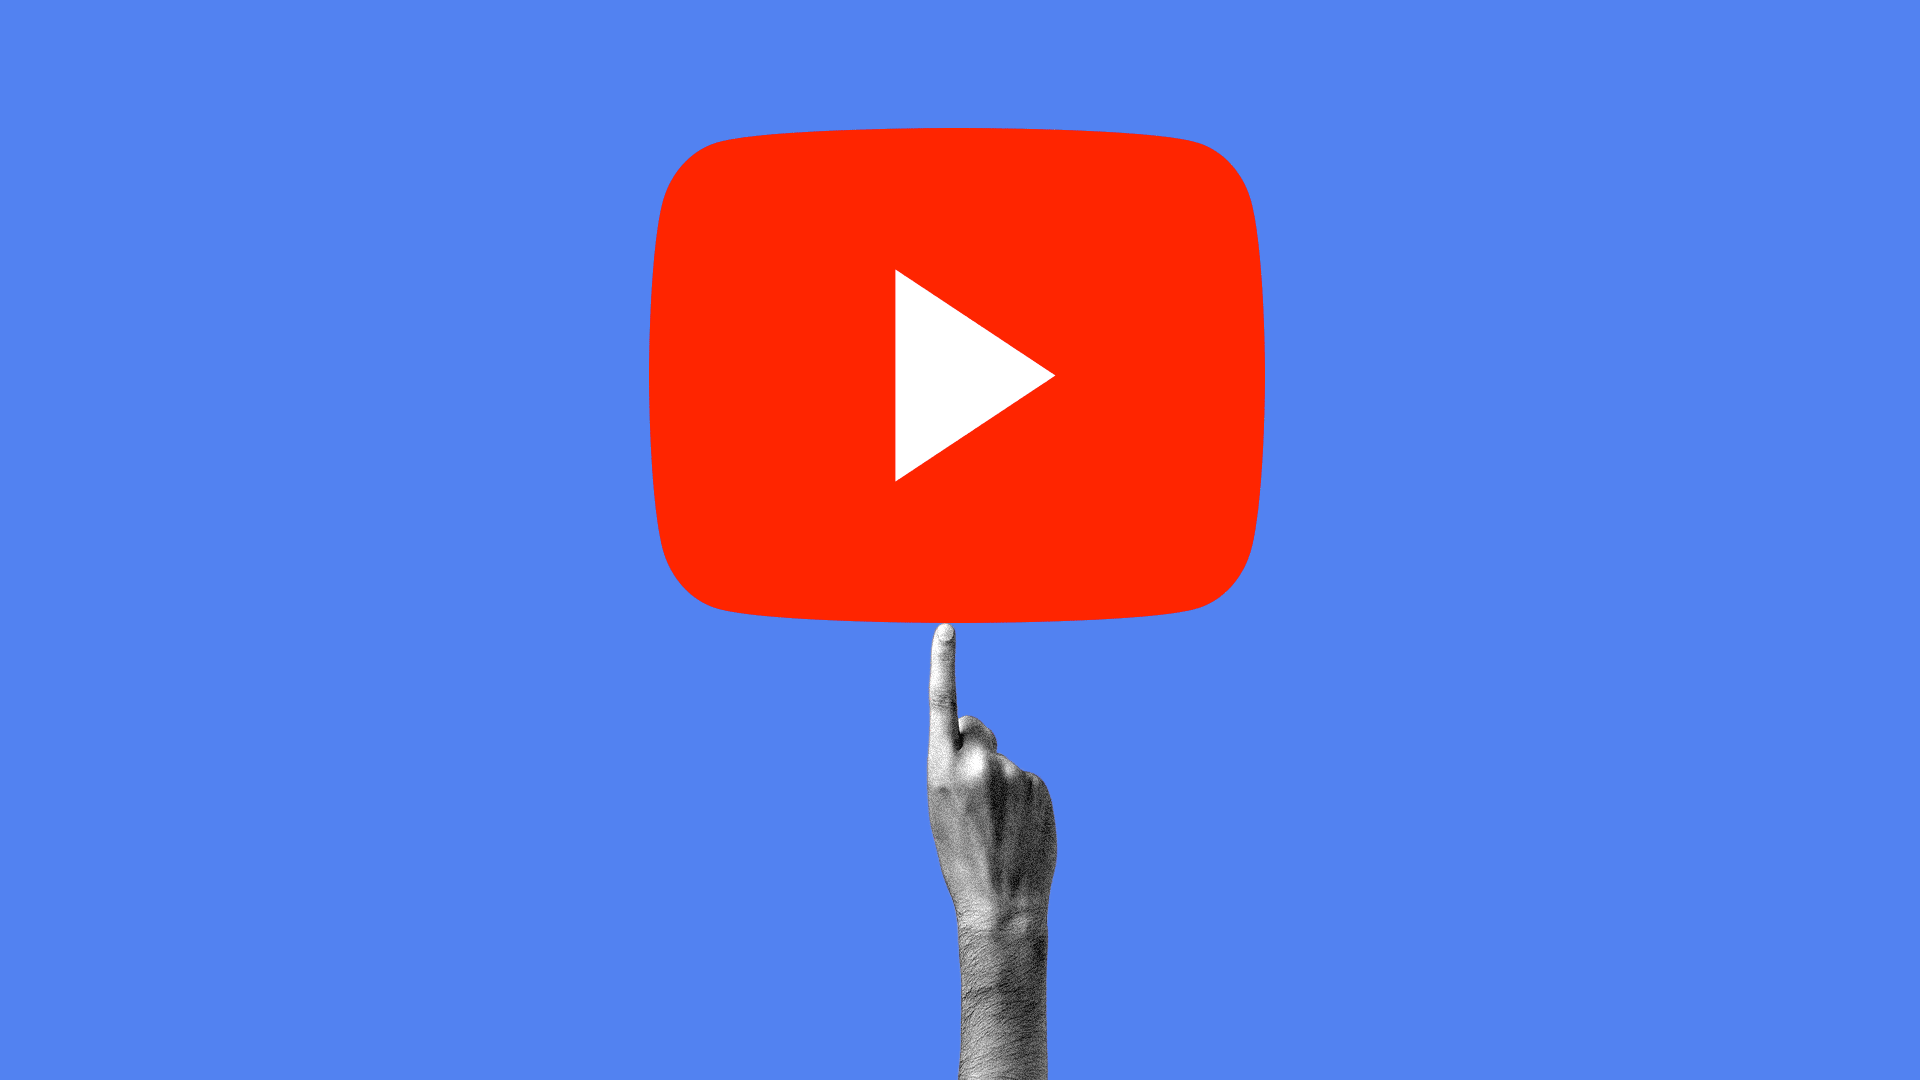 A hand spinning the YouTube logo